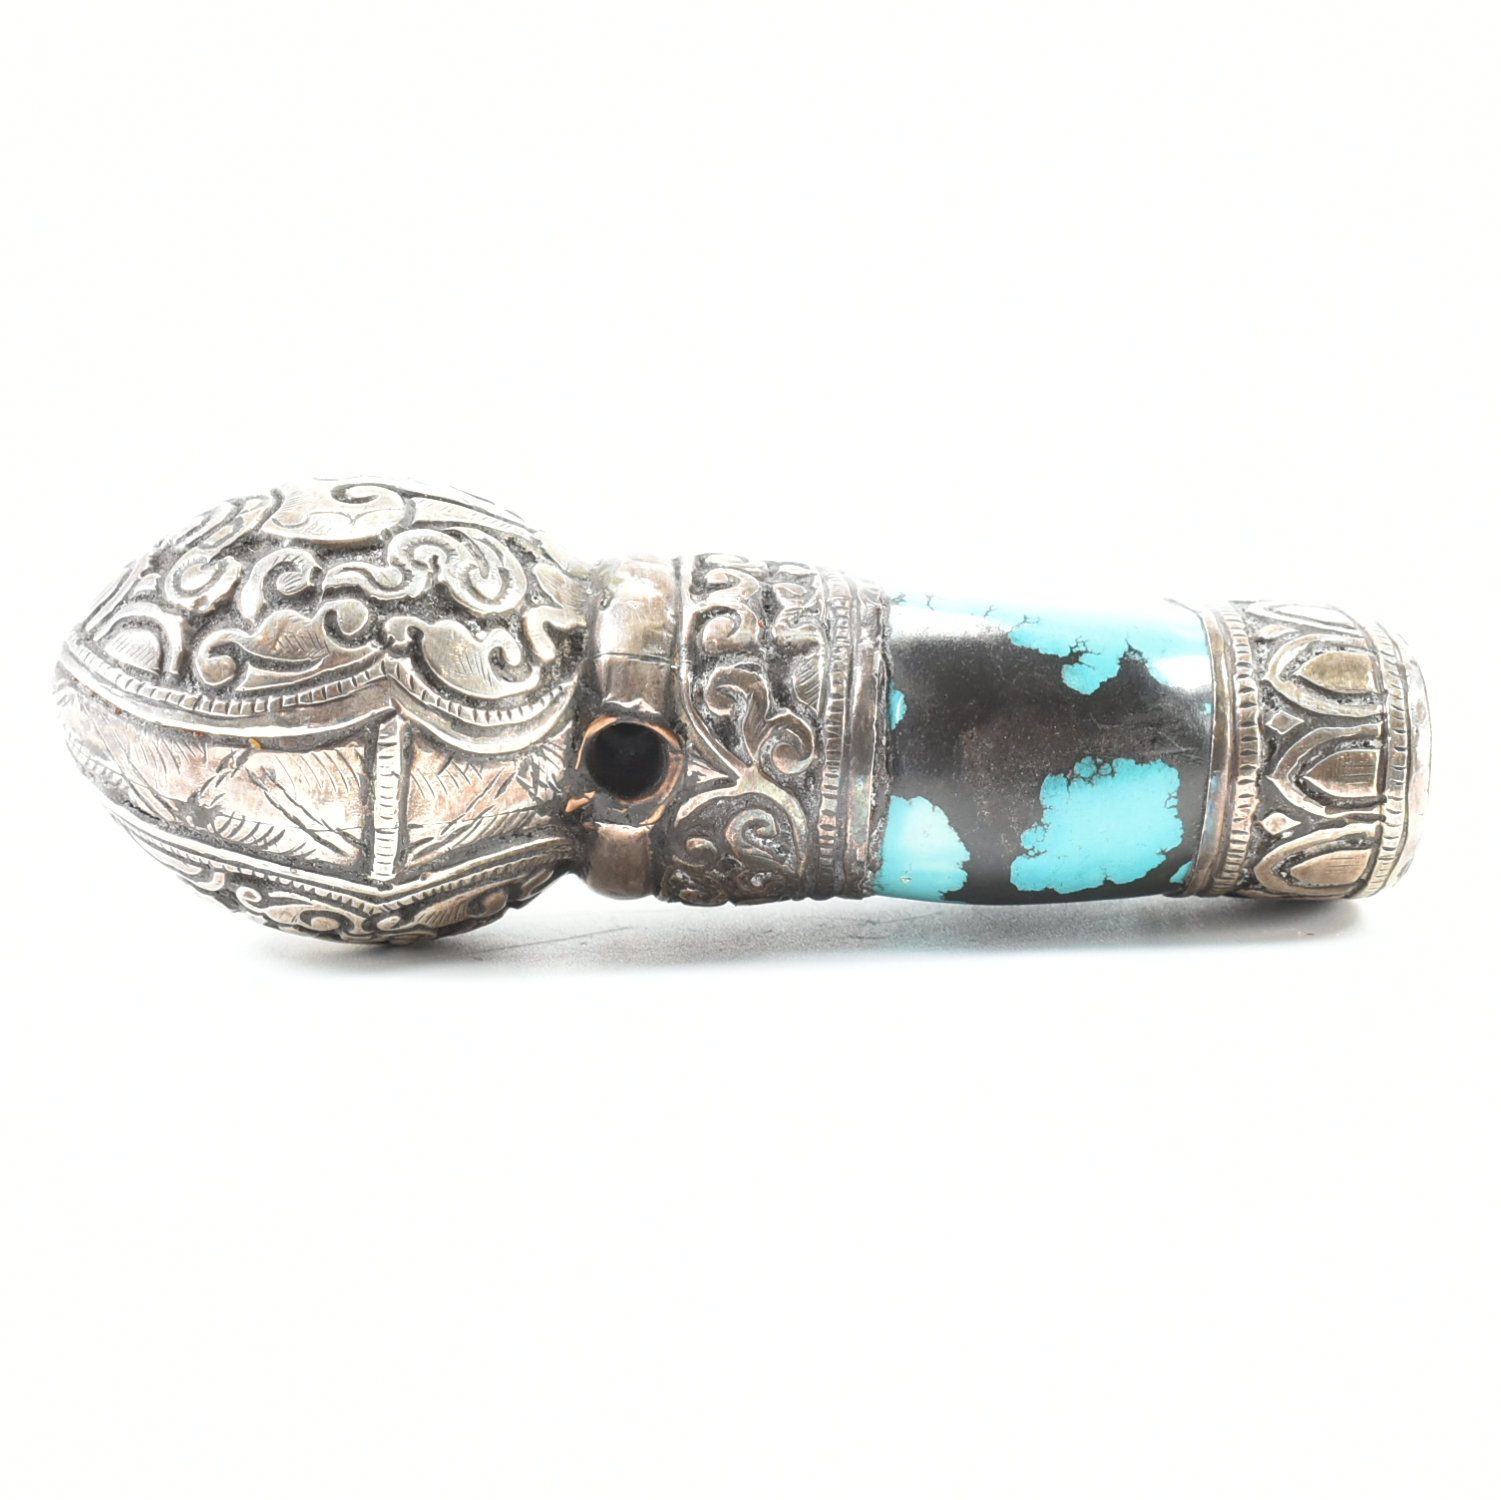 TIBETAN SILVER & TURQUOISE PERSONAL SEAL - Image 5 of 7